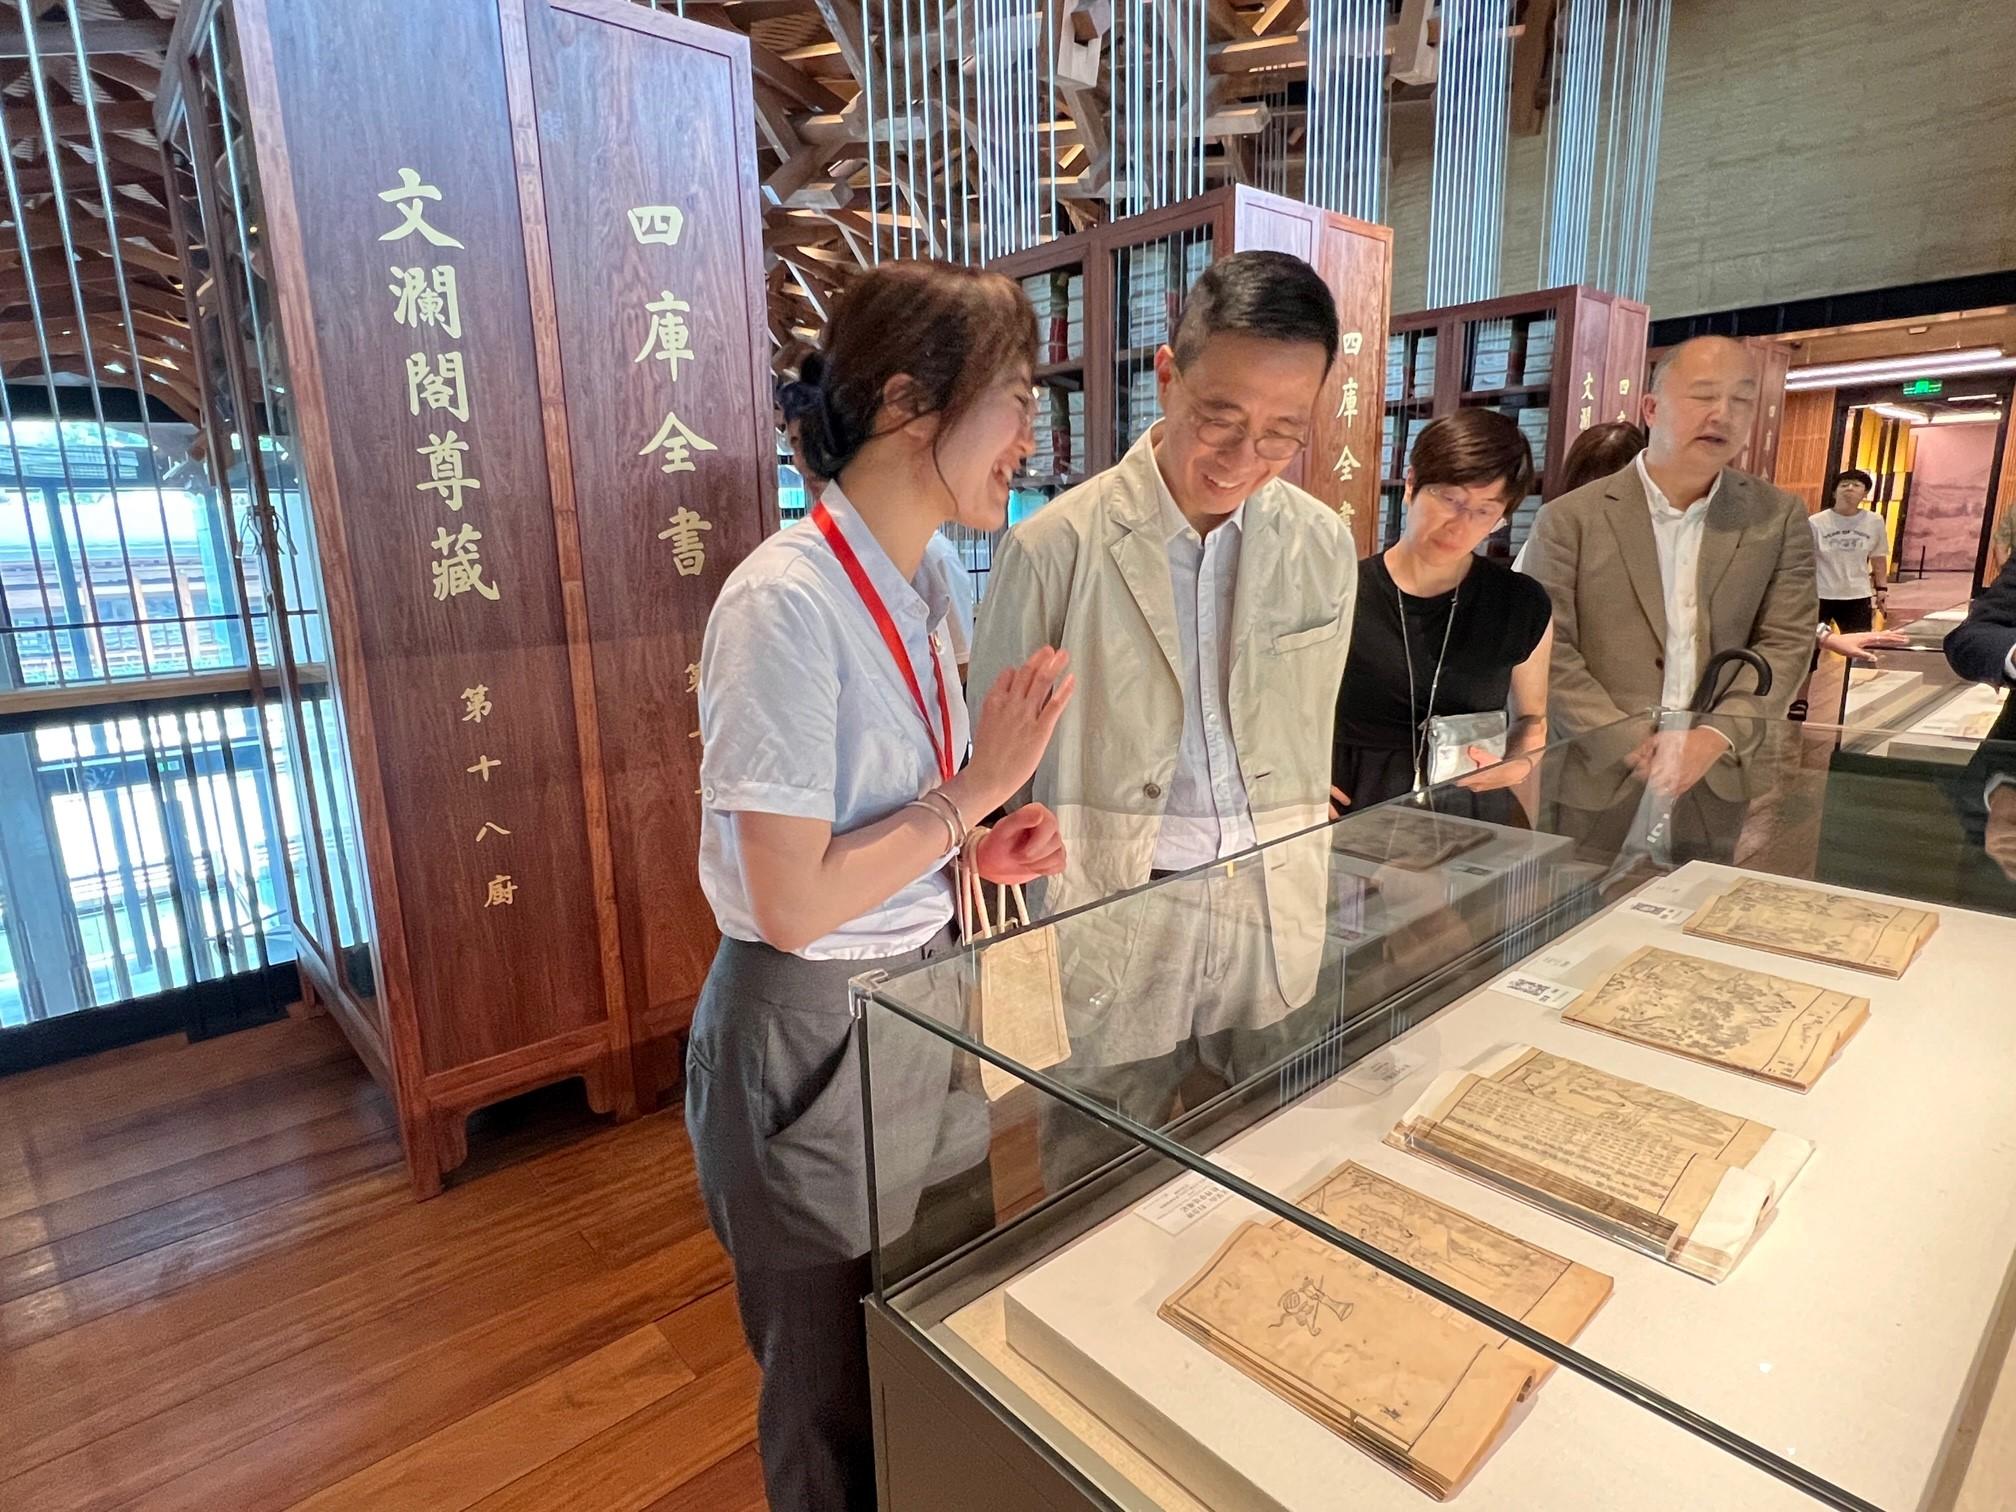 The Secretary for Culture, Sports and Tourism, Mr Kevin Yeung, visited the Hangzhou National Archives of Publications and Culture yesterday (July 30). Photo shows Mr Yeung (second left) being briefed on a variety of Chinese classics and Chinese cultural relics.